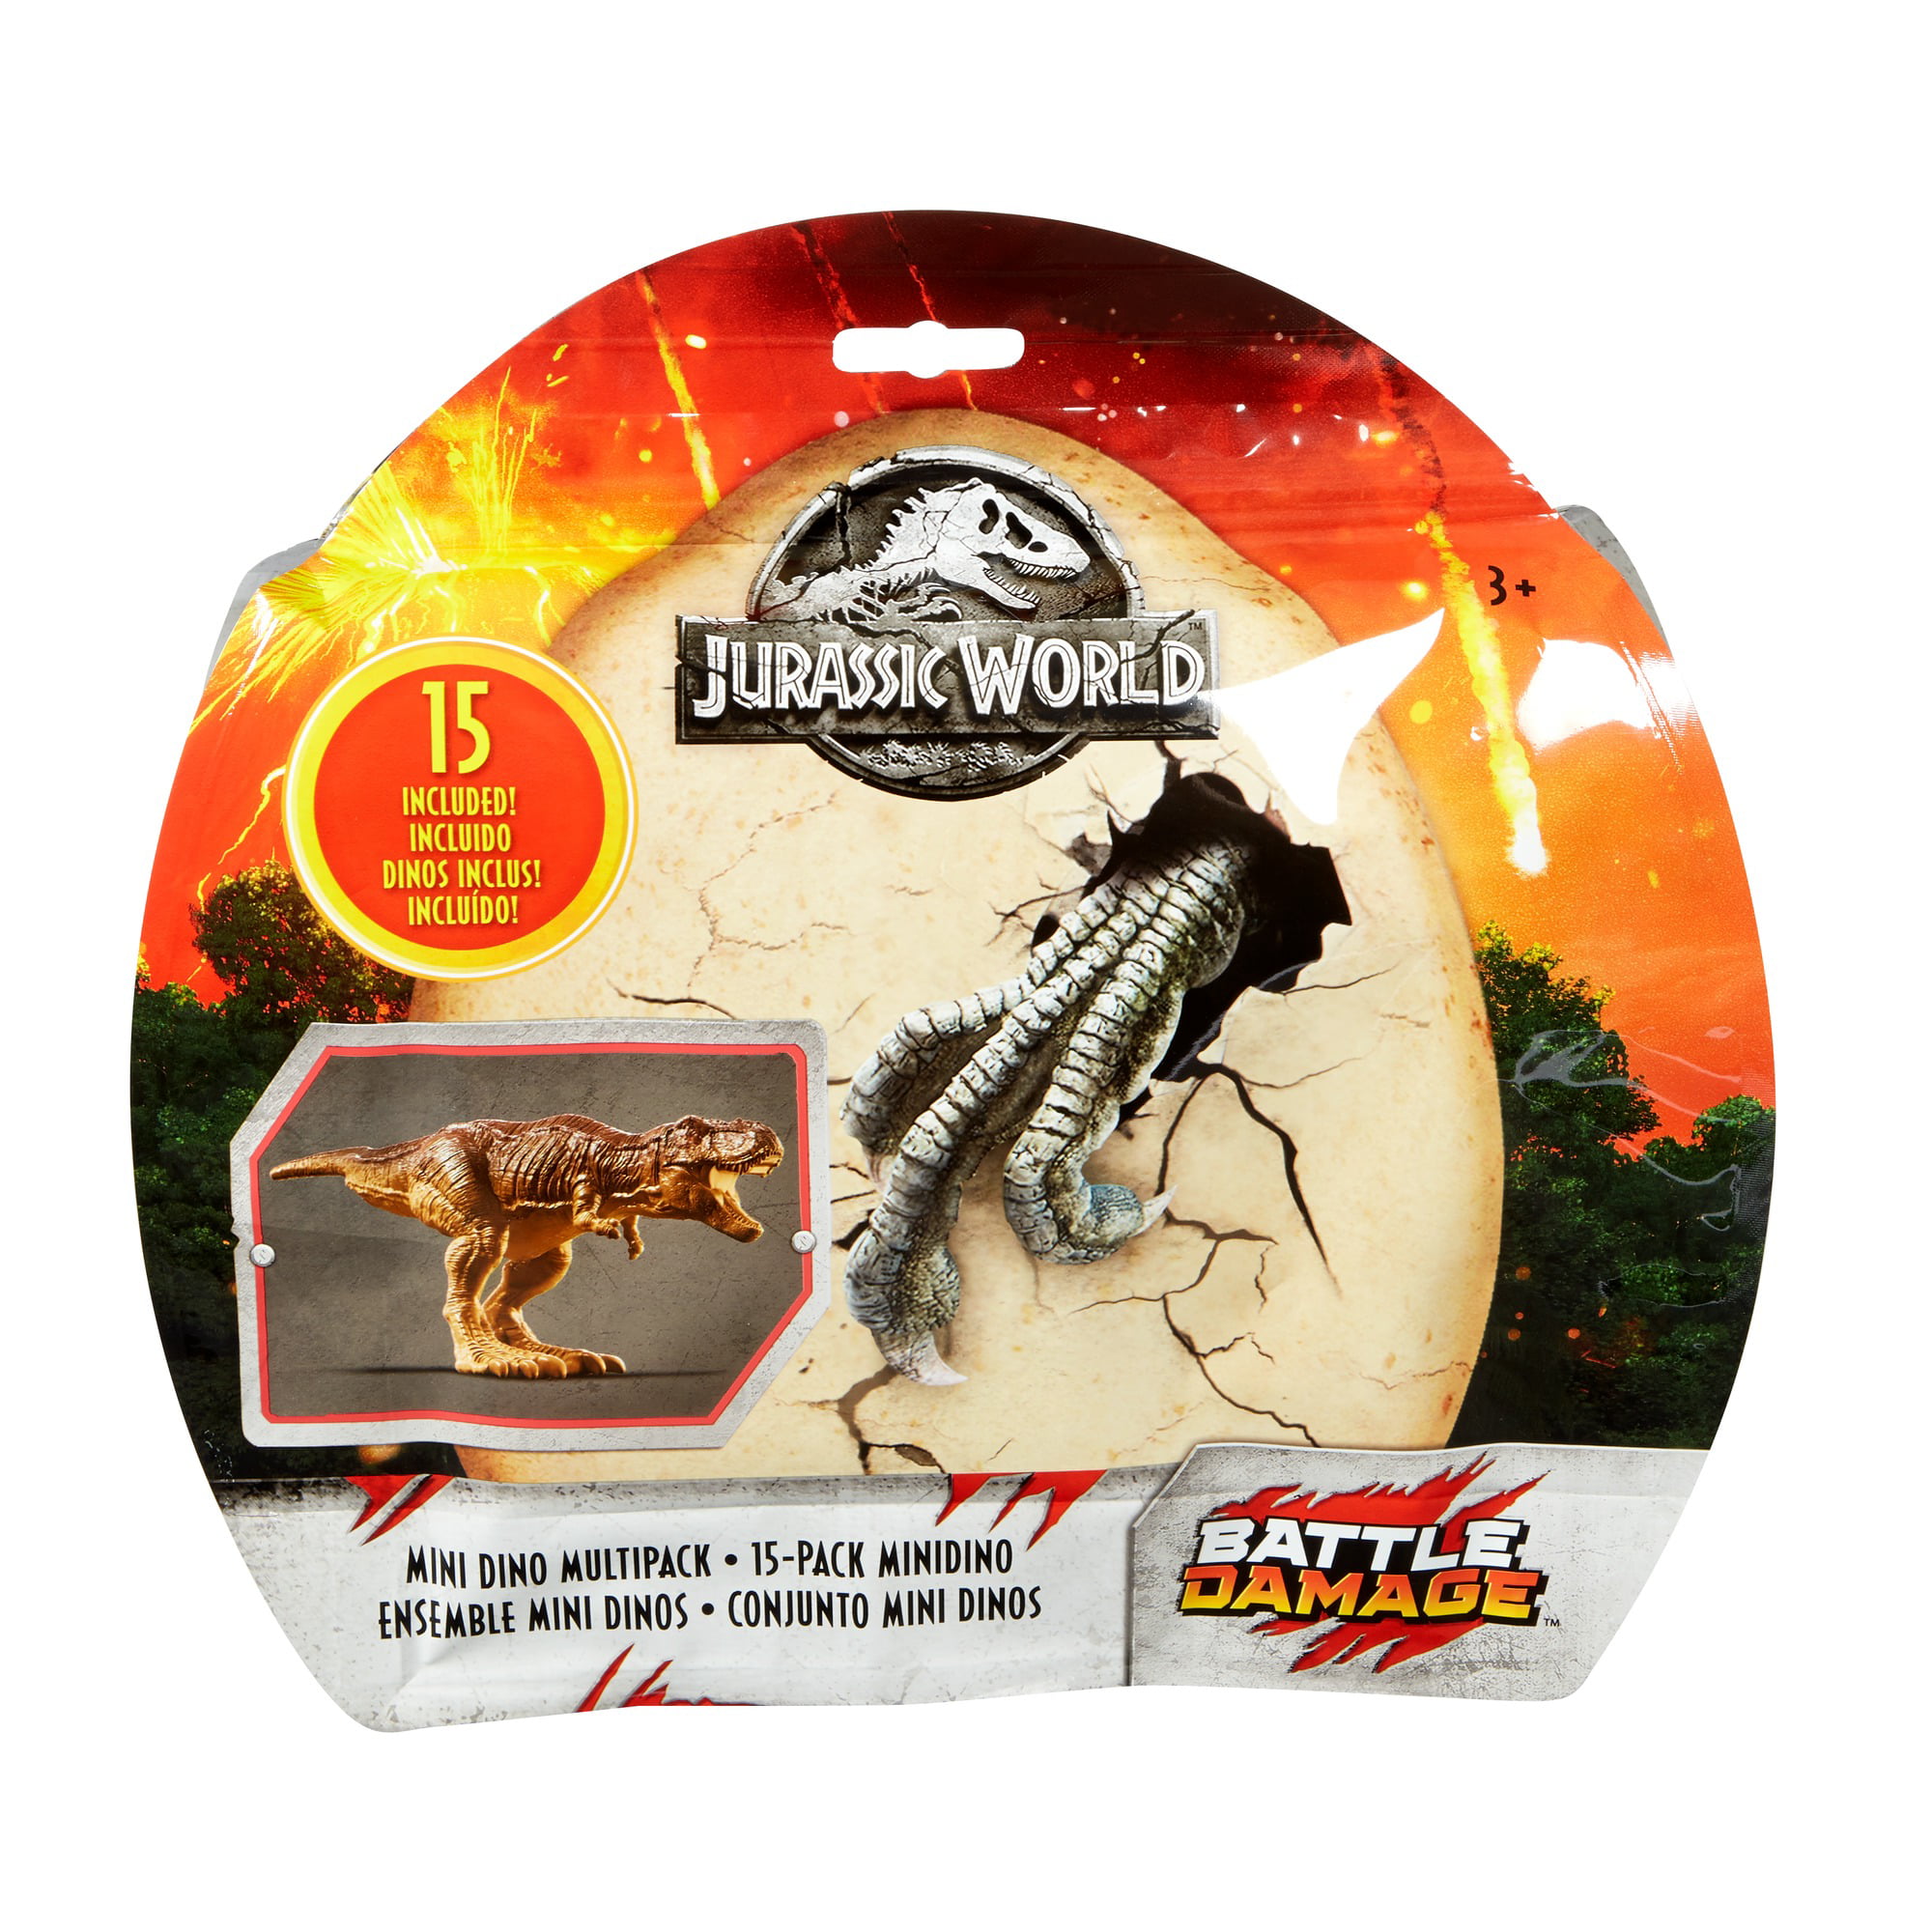 2 Themes to choose from Jurassic World play Sets by Mattel Age 3 